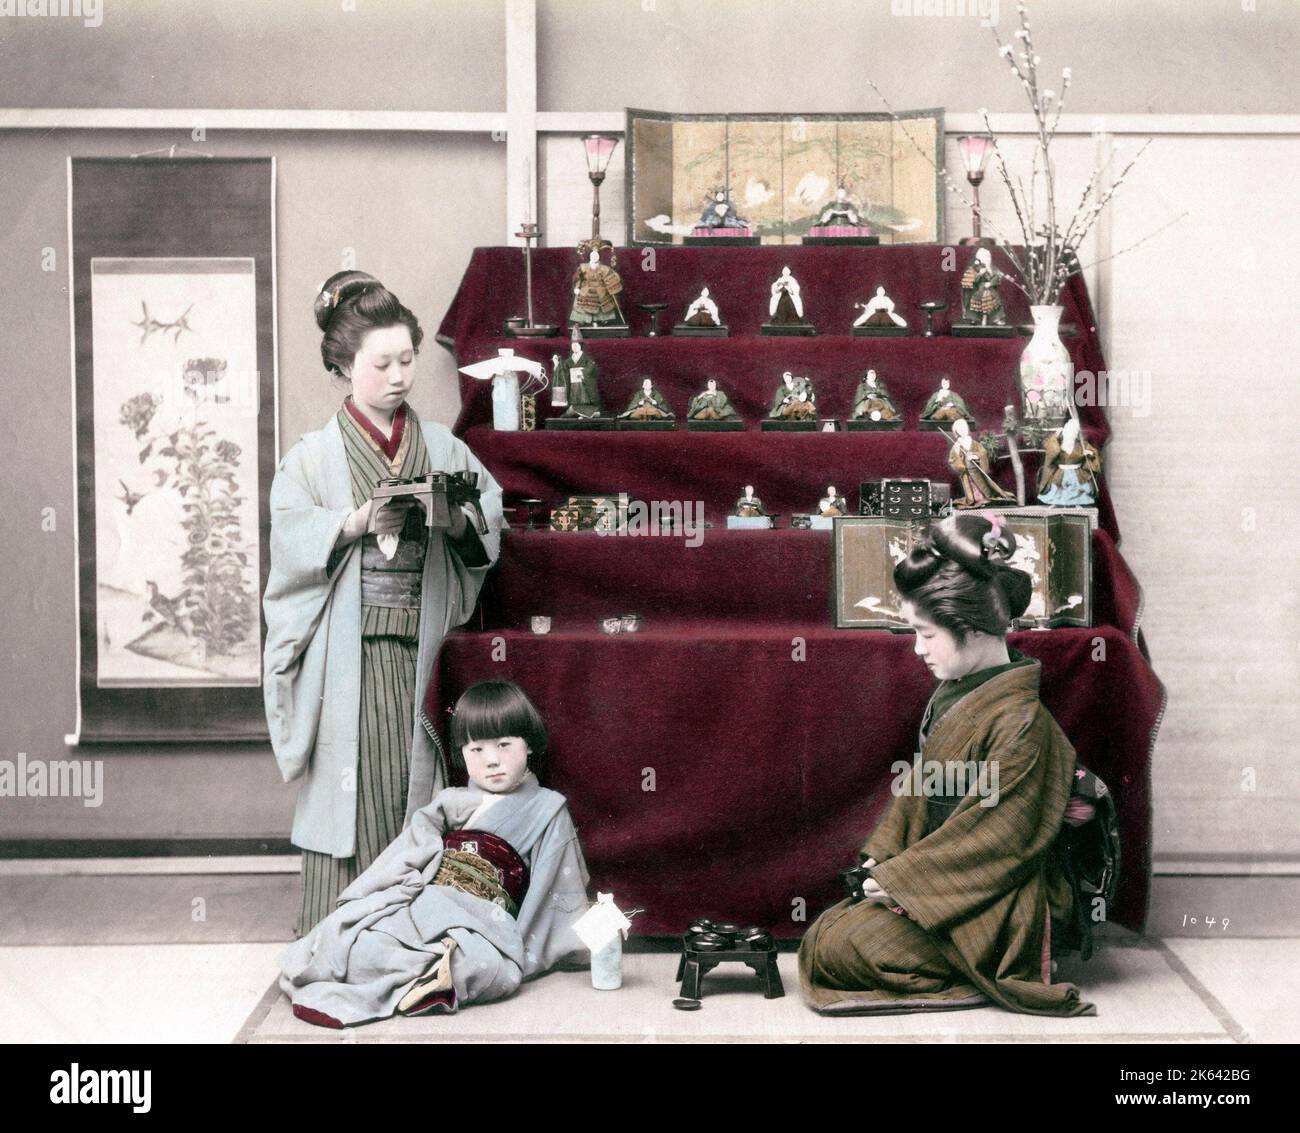 c.1880s Japan - display stand for girls' festival, dolls, Japan. Stock Photo